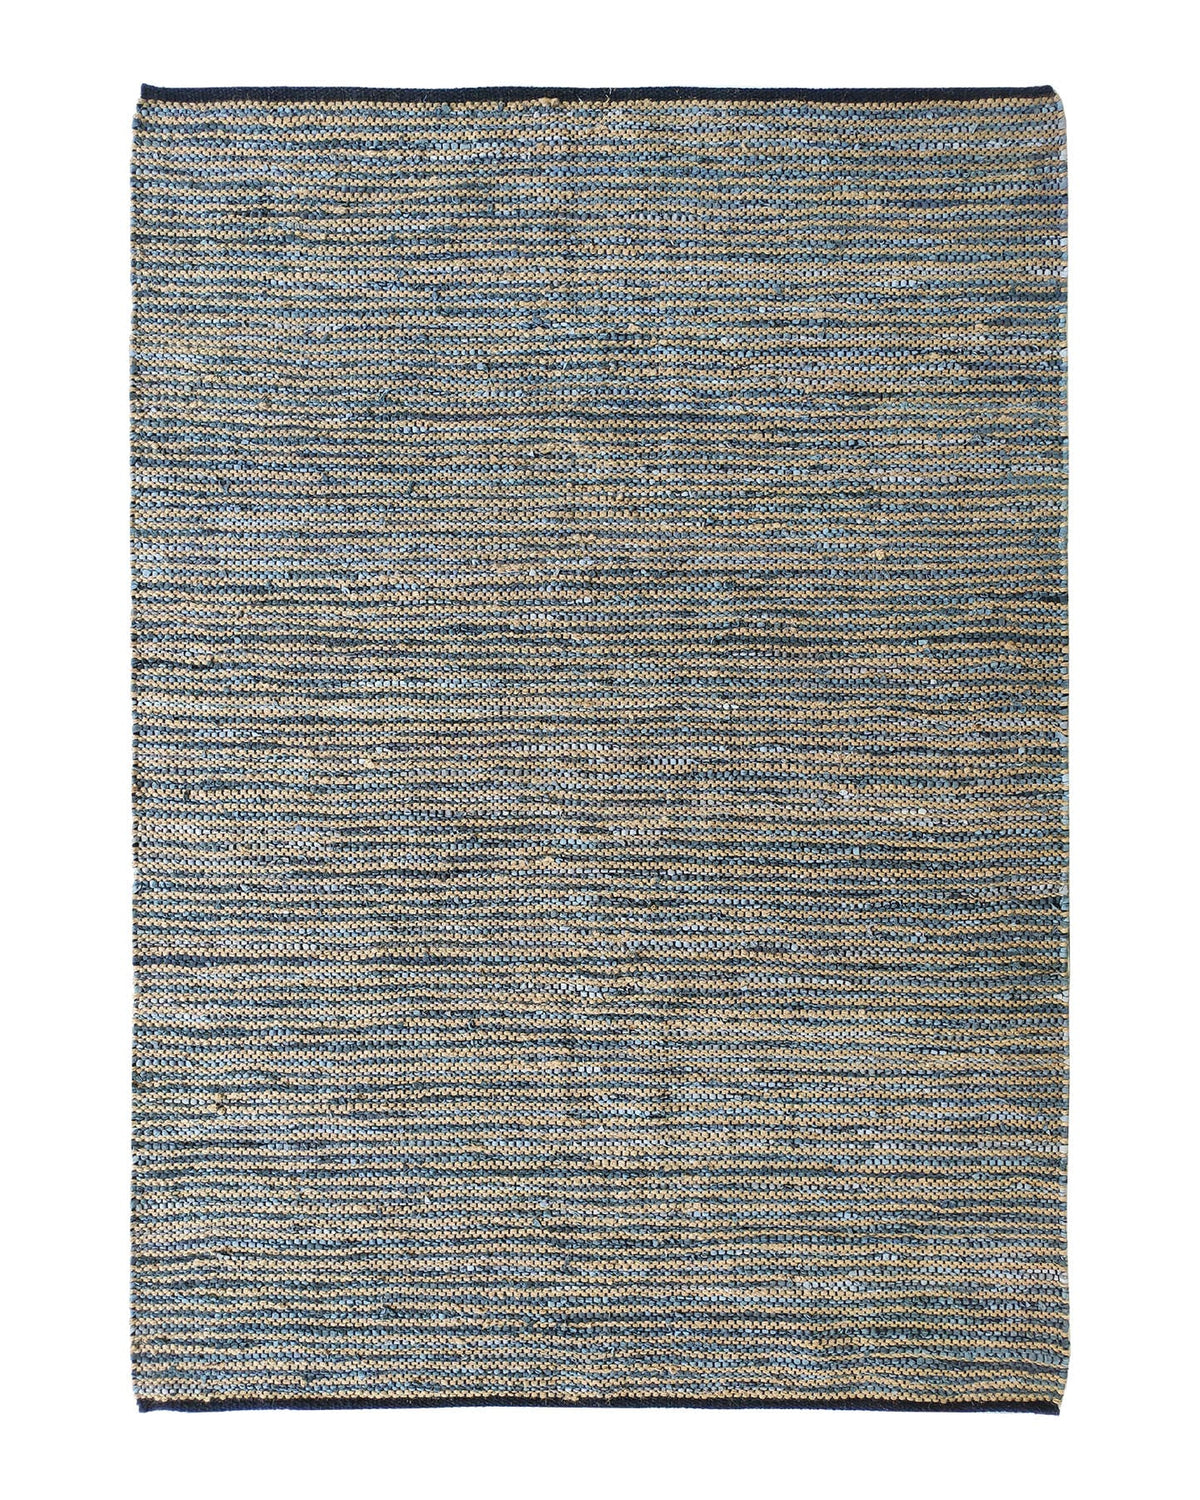 Hand Made Jute & Leather Woven Rug Multi Color (2 Sizes)